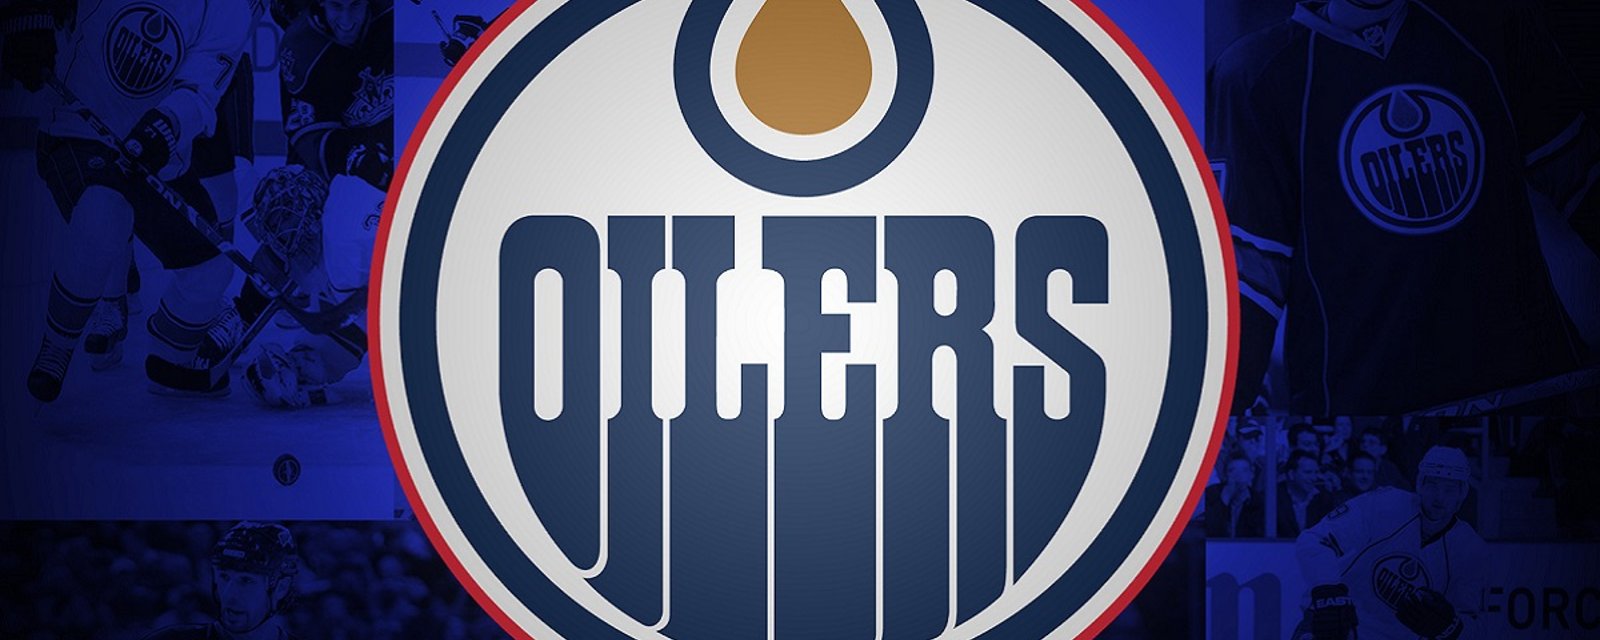 Breaking: The Edmonton Oilers have named their new captain.